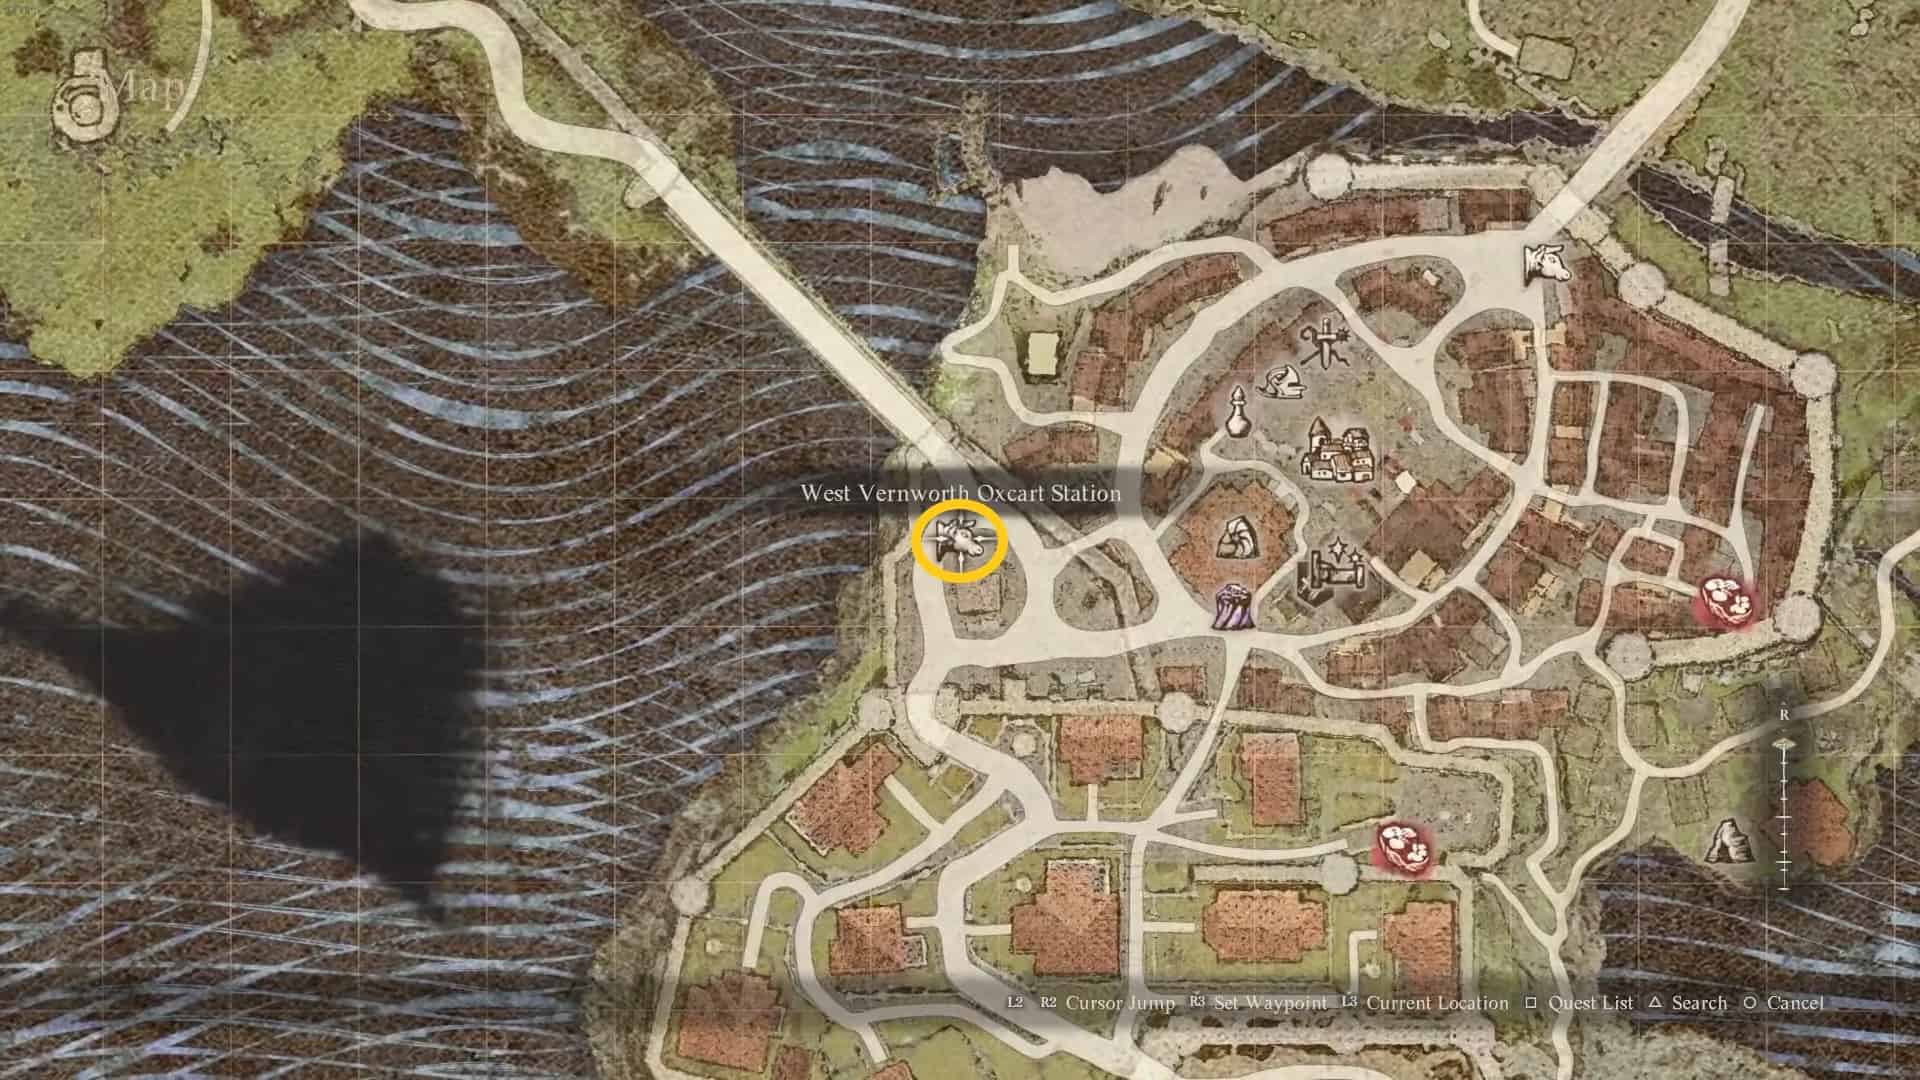 West vernworth Oxcart Station location in Dragon's Dogma 2